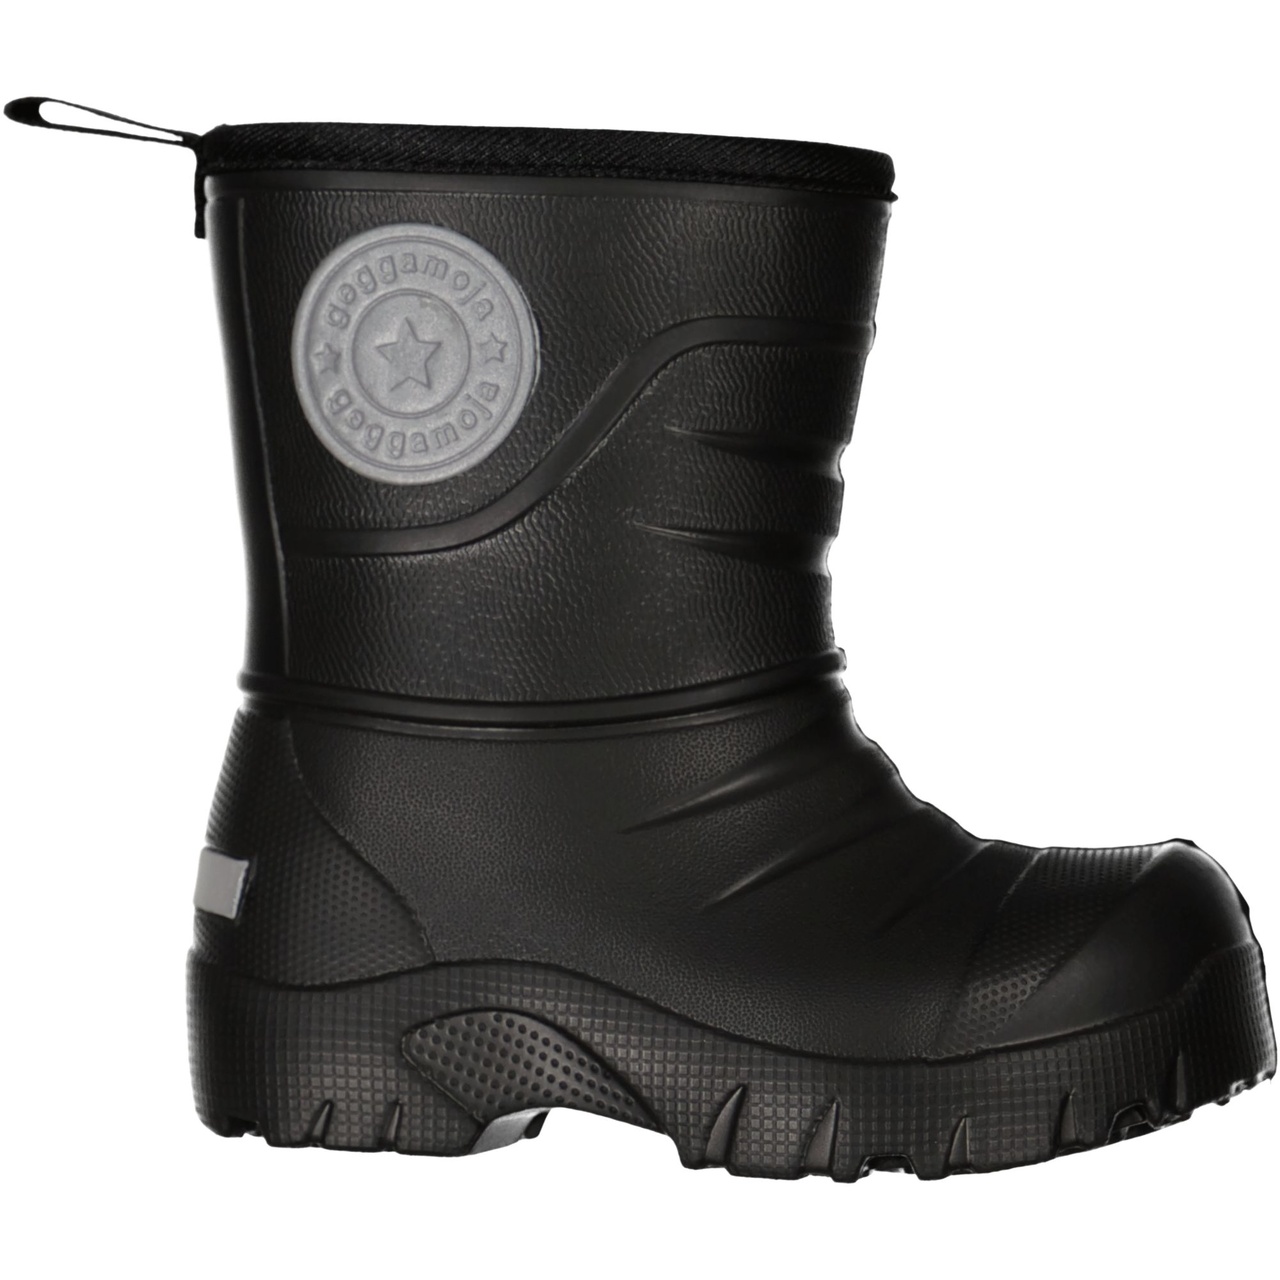 All-weather Boot Black 35